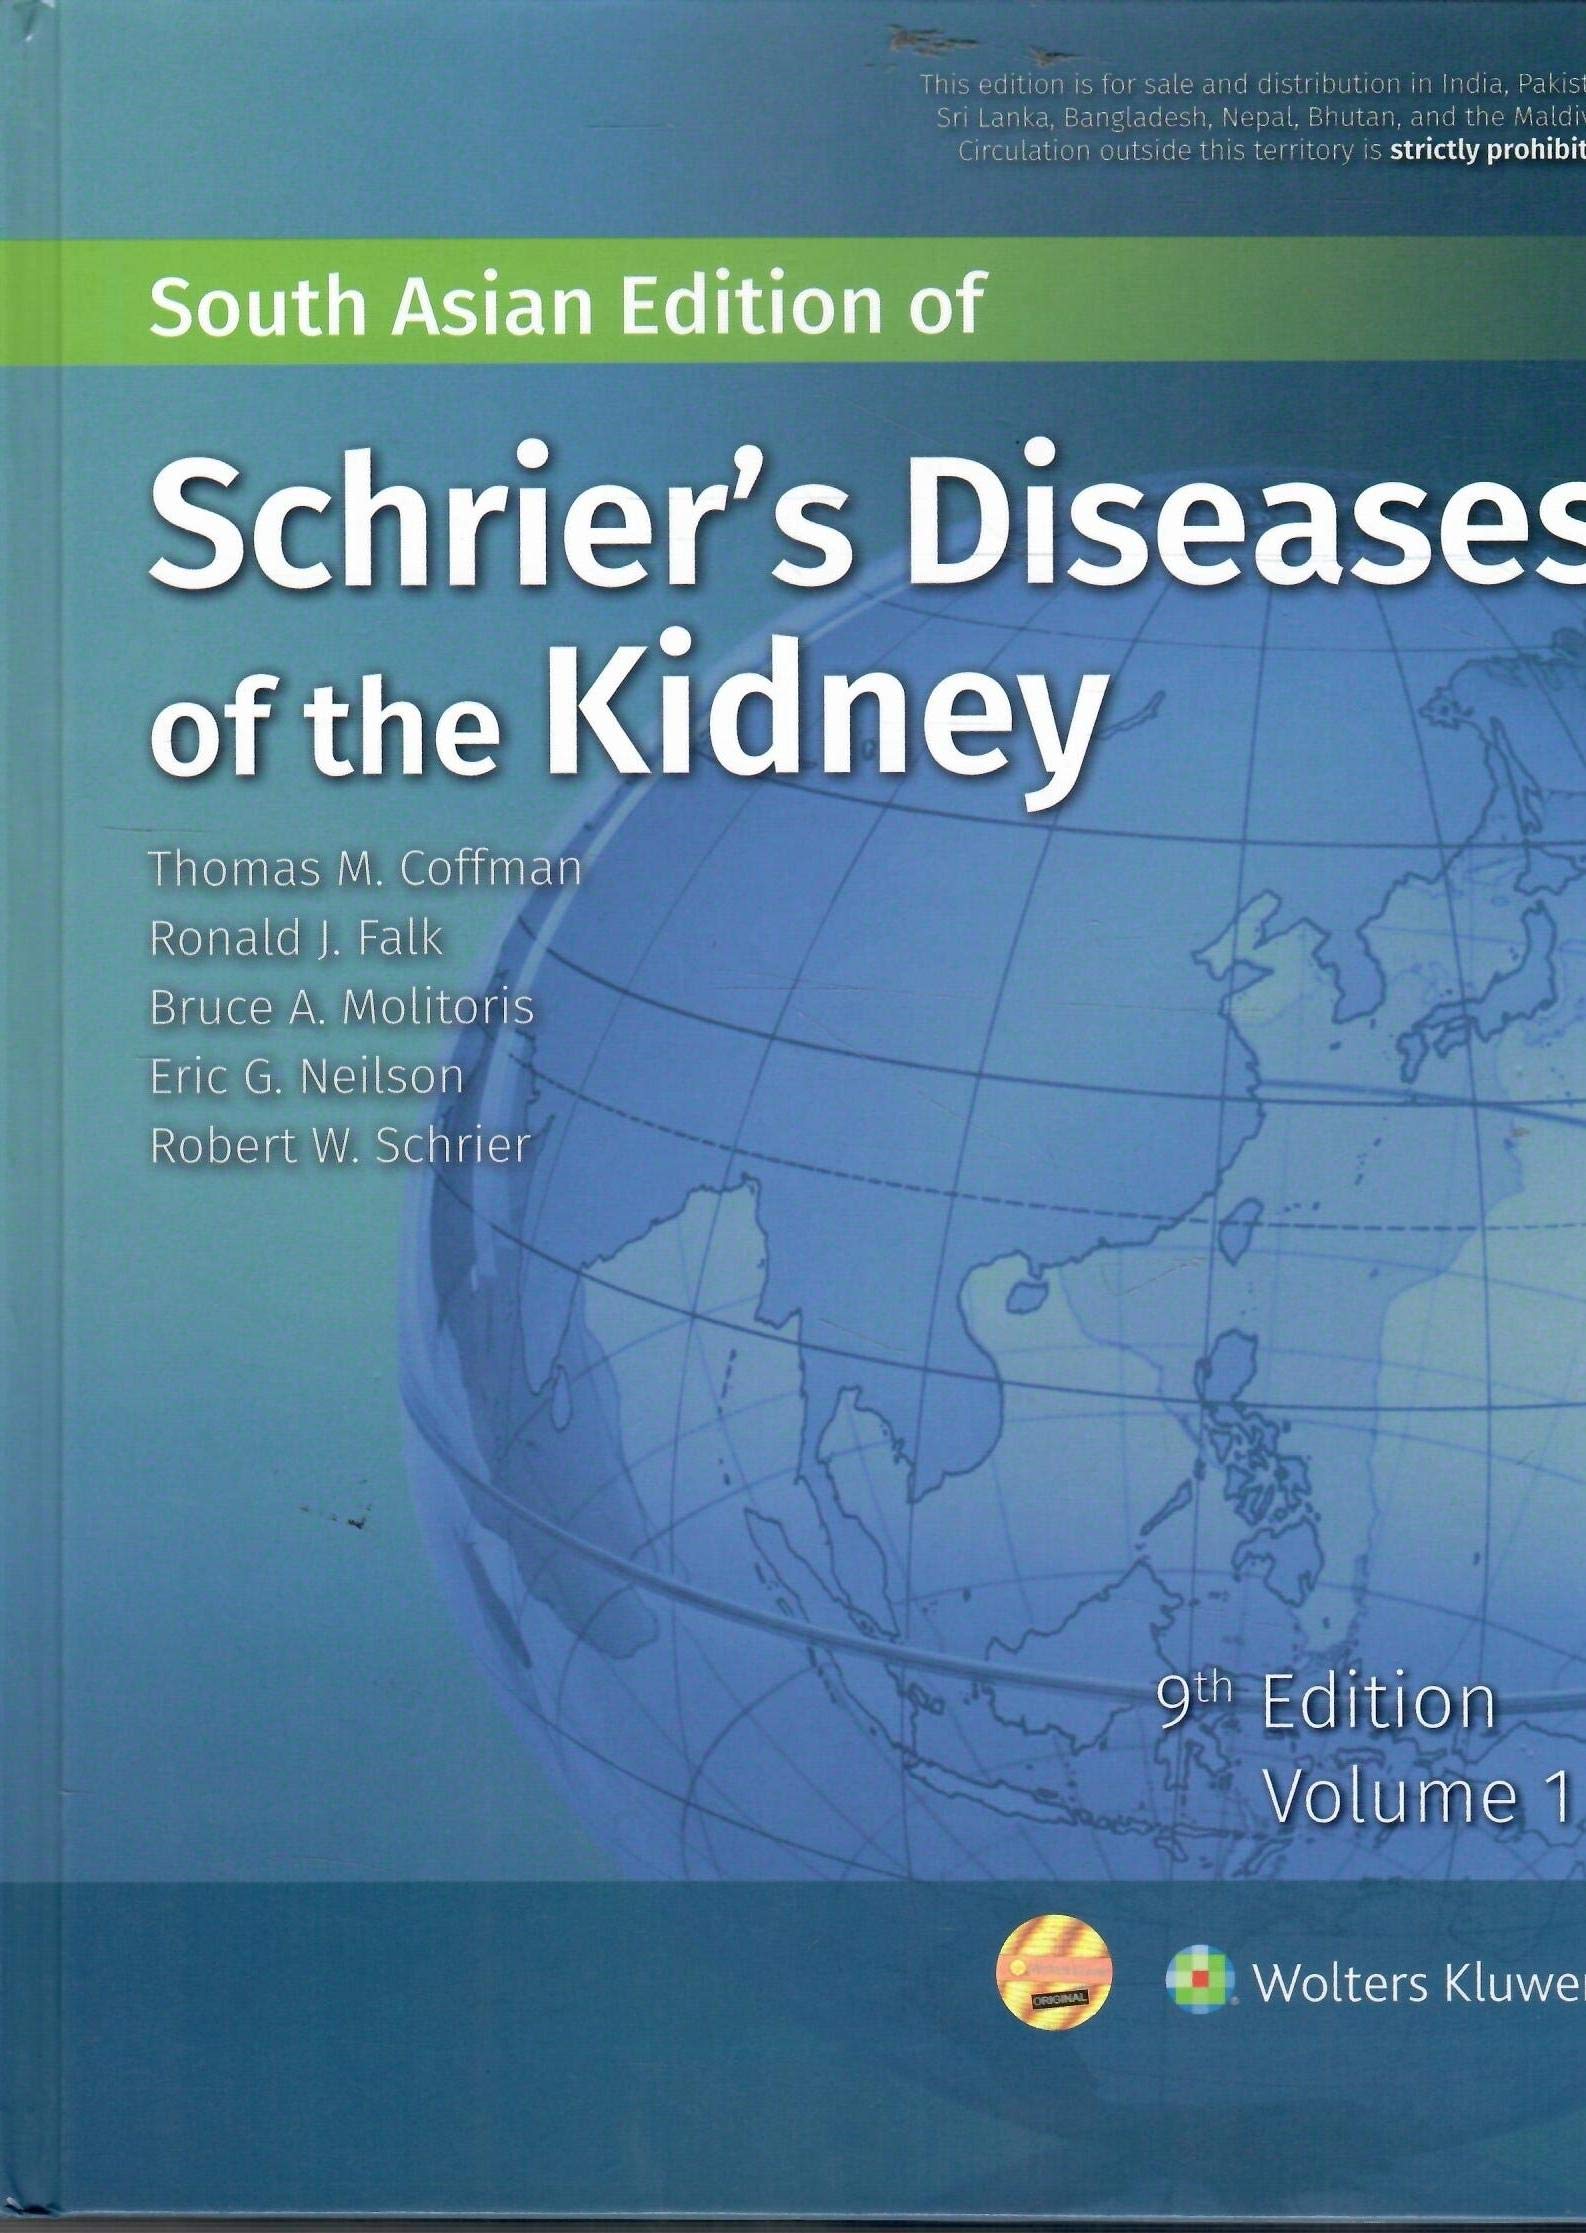 Schrier's Diseases of the Kidney 9/e- AIBH Exclusive